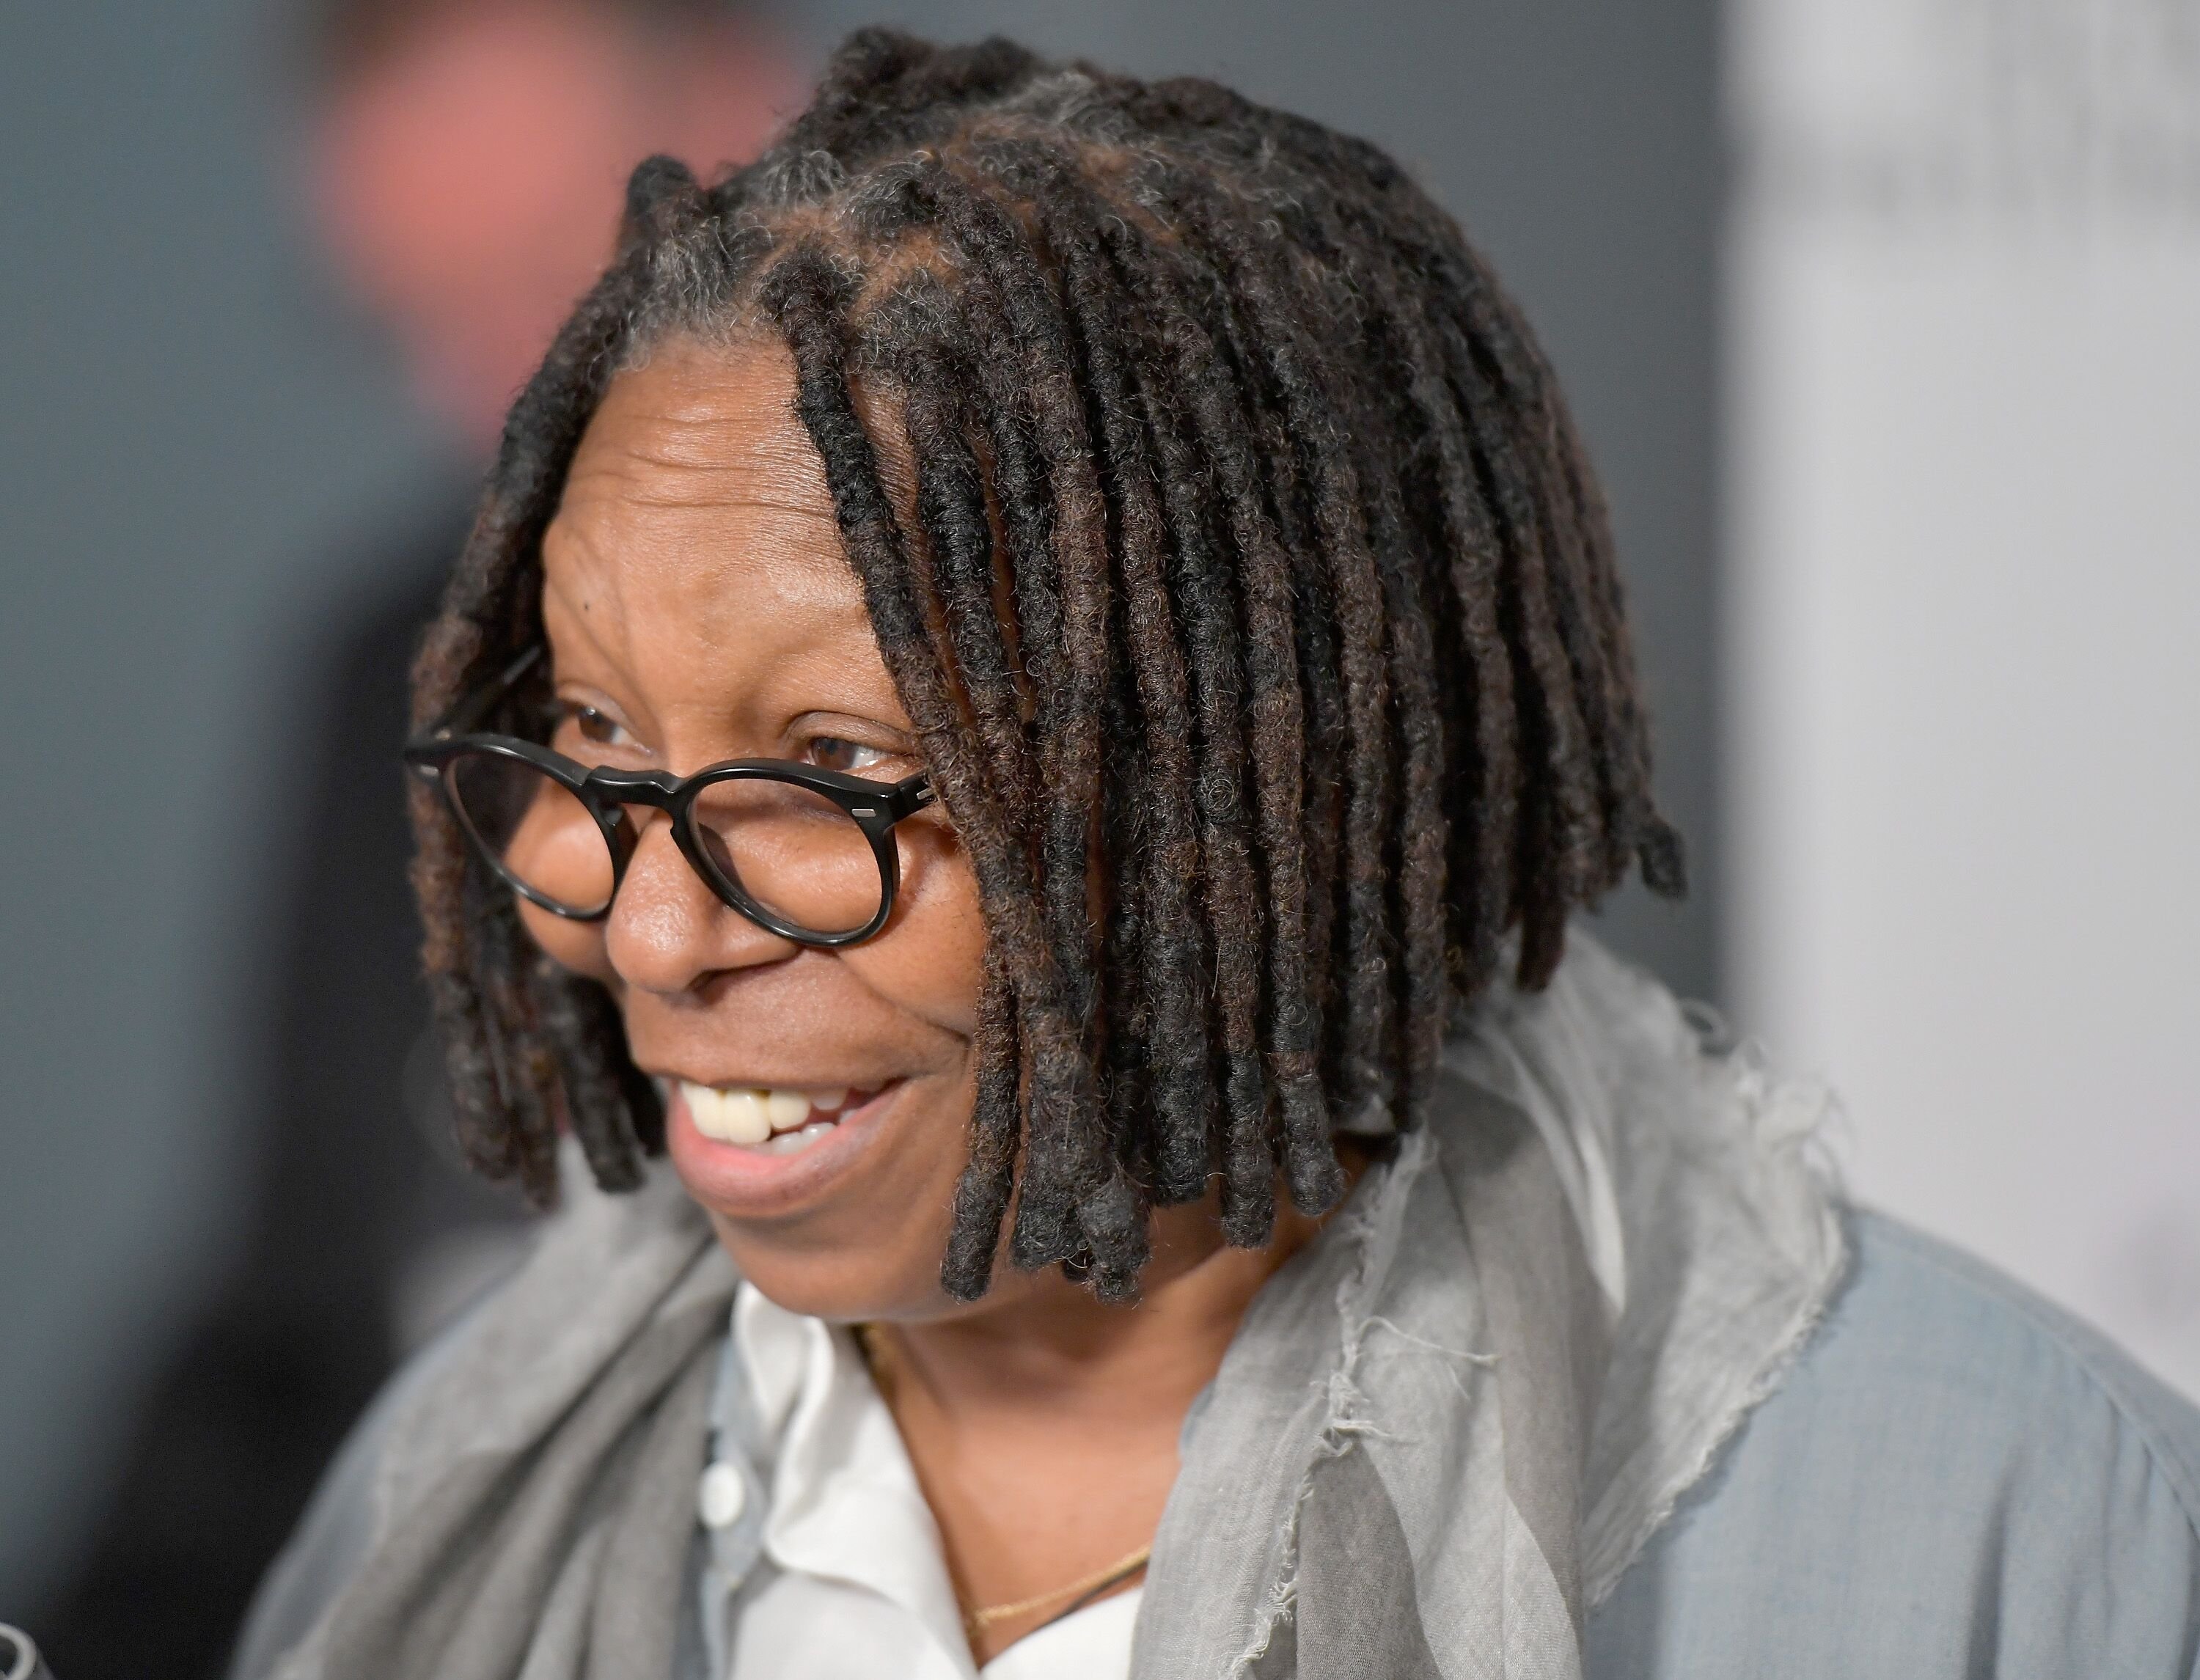 Host, actress Whoopi Goldberg, speaks at Chicken Coupe during Food Network & Cooking Channel New York City Wine & Food Festival presented by FOOD & WINE at The Loeb Boathouse | Photo: Getty Images